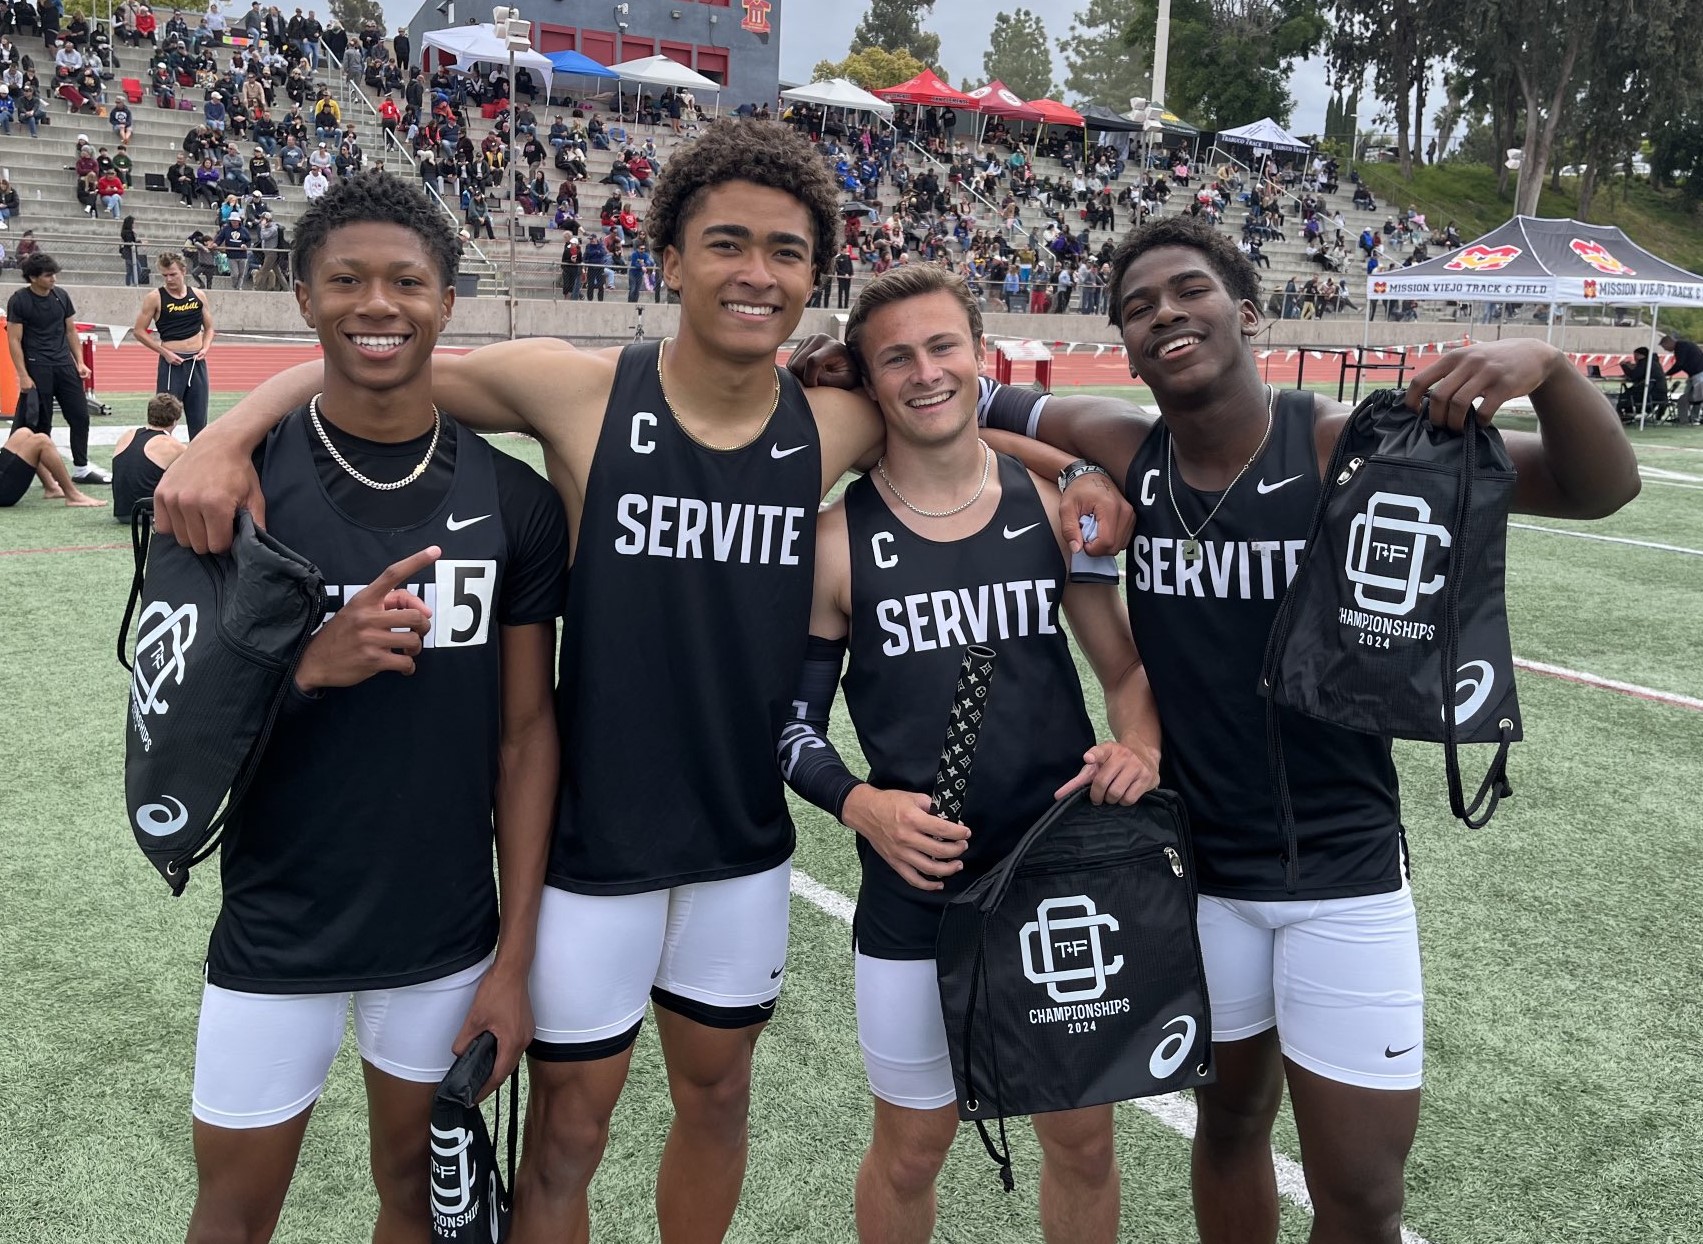 The Servite quartet of, from left, Hudson Haiduc, Robert Gardner, Camren Hughes and Quaid Carr won the 4x100 relay in a meet-record time of 41.66 seconds at the Orange County Championships on Saturday, April 13. (Photo by Steve Fryer, Orange County Register/SCNG)